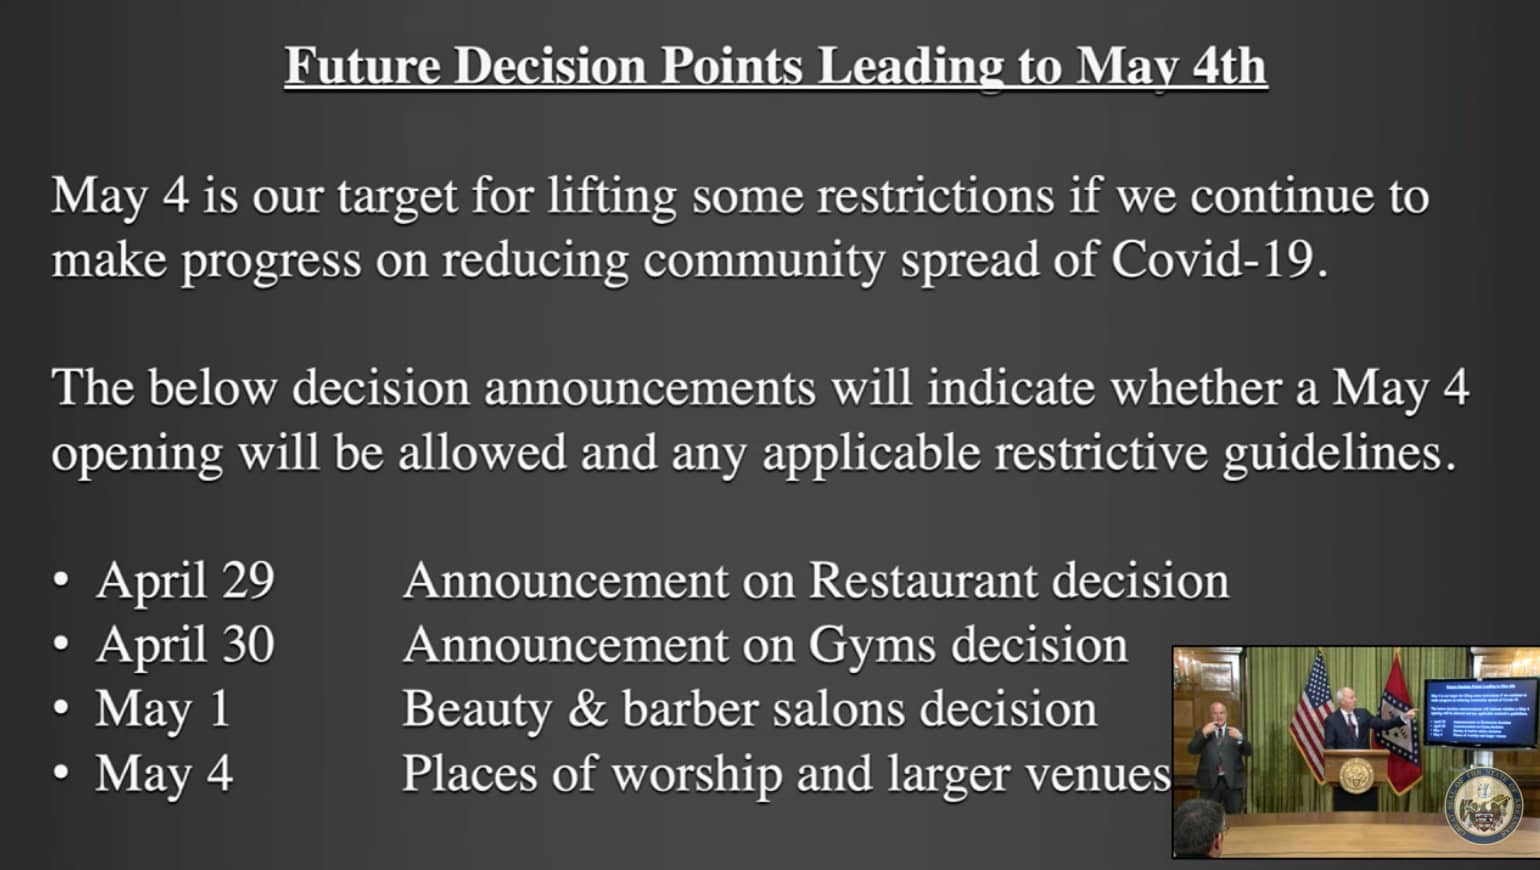 Future Decision Points Leading to May 4